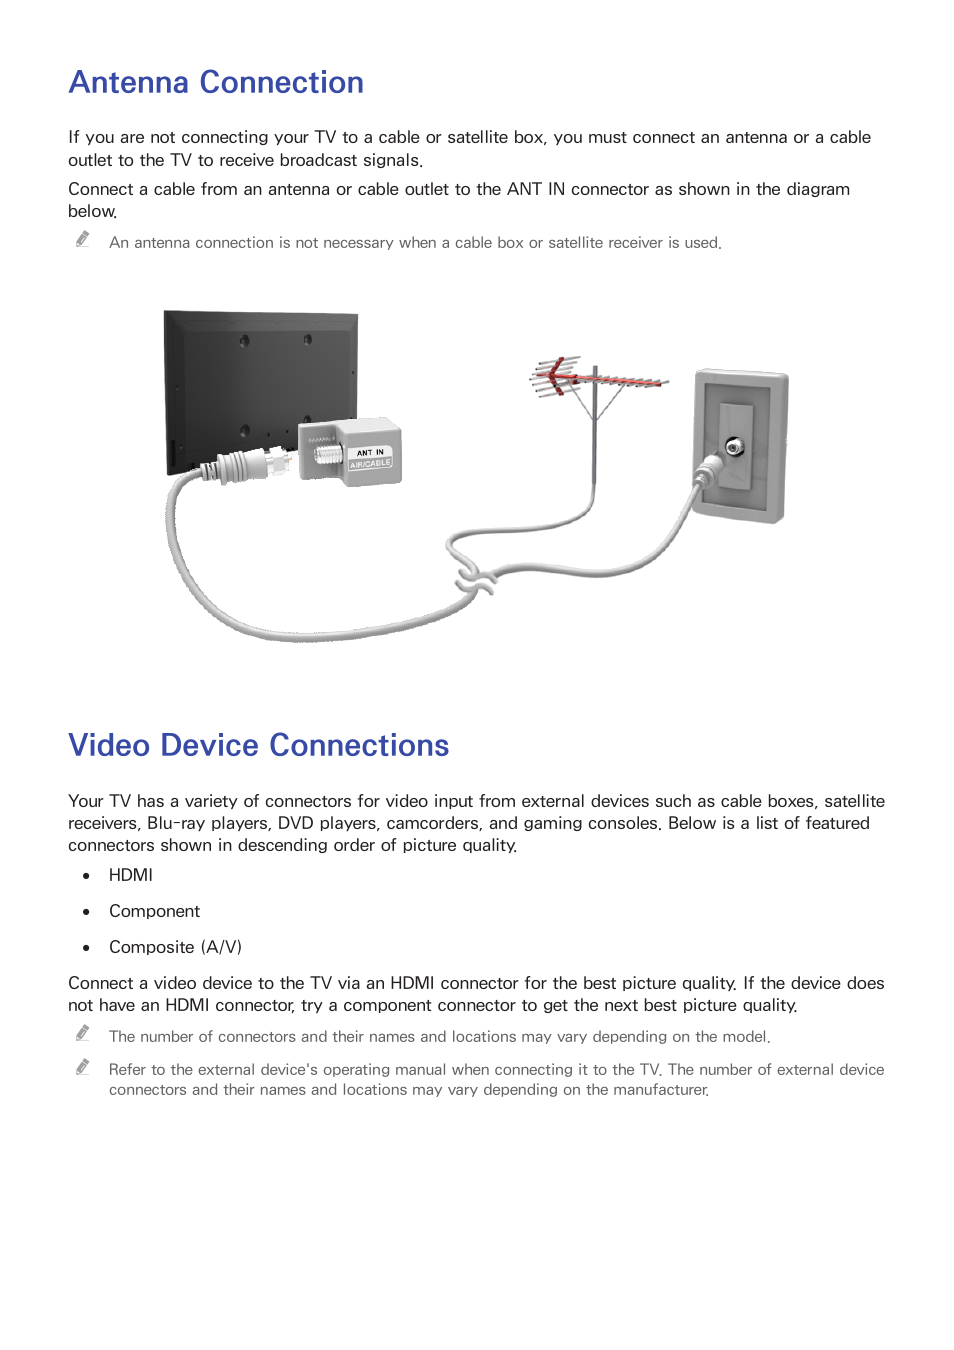 Connecting antenna and external devices, Antenna connection, Video